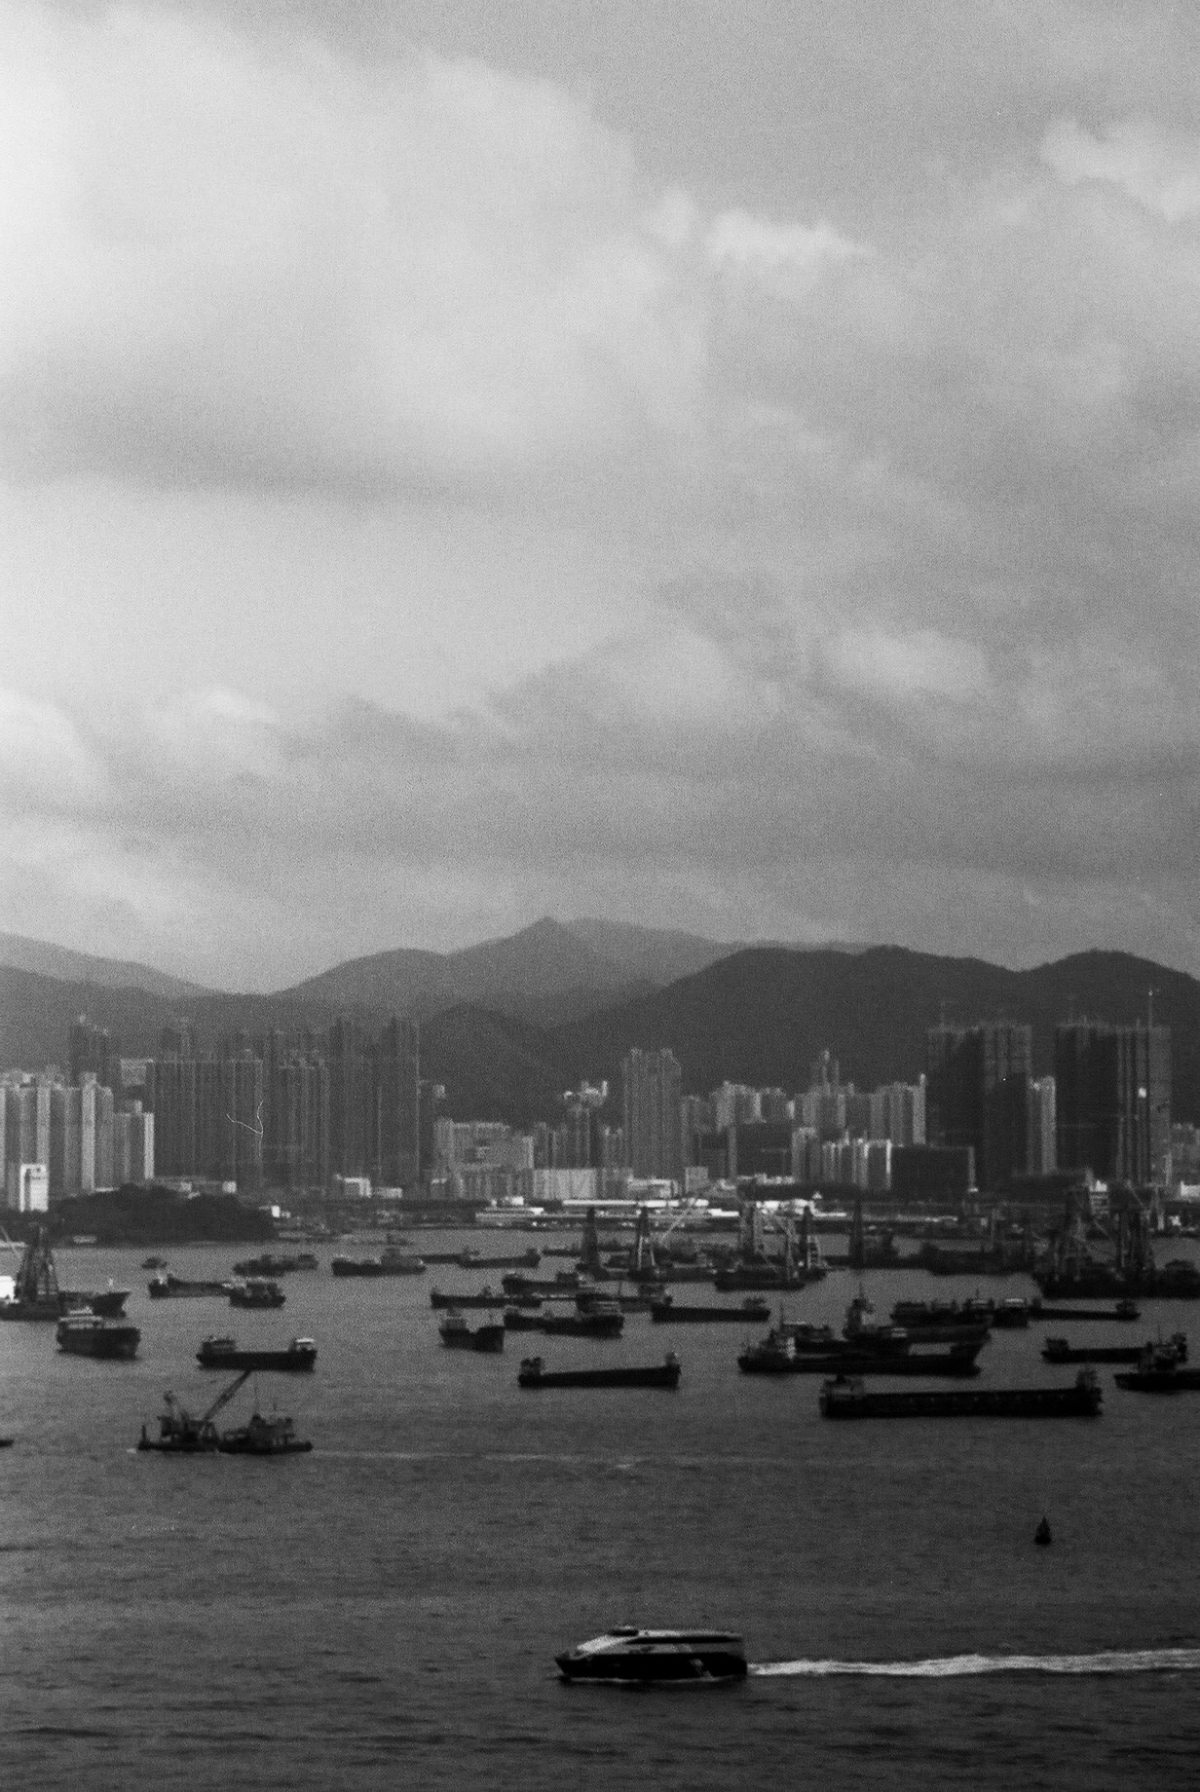 Safe harbour - Shot on ADOX Silvermax 100 at EI 100. Black and white negative film in 35mm format.